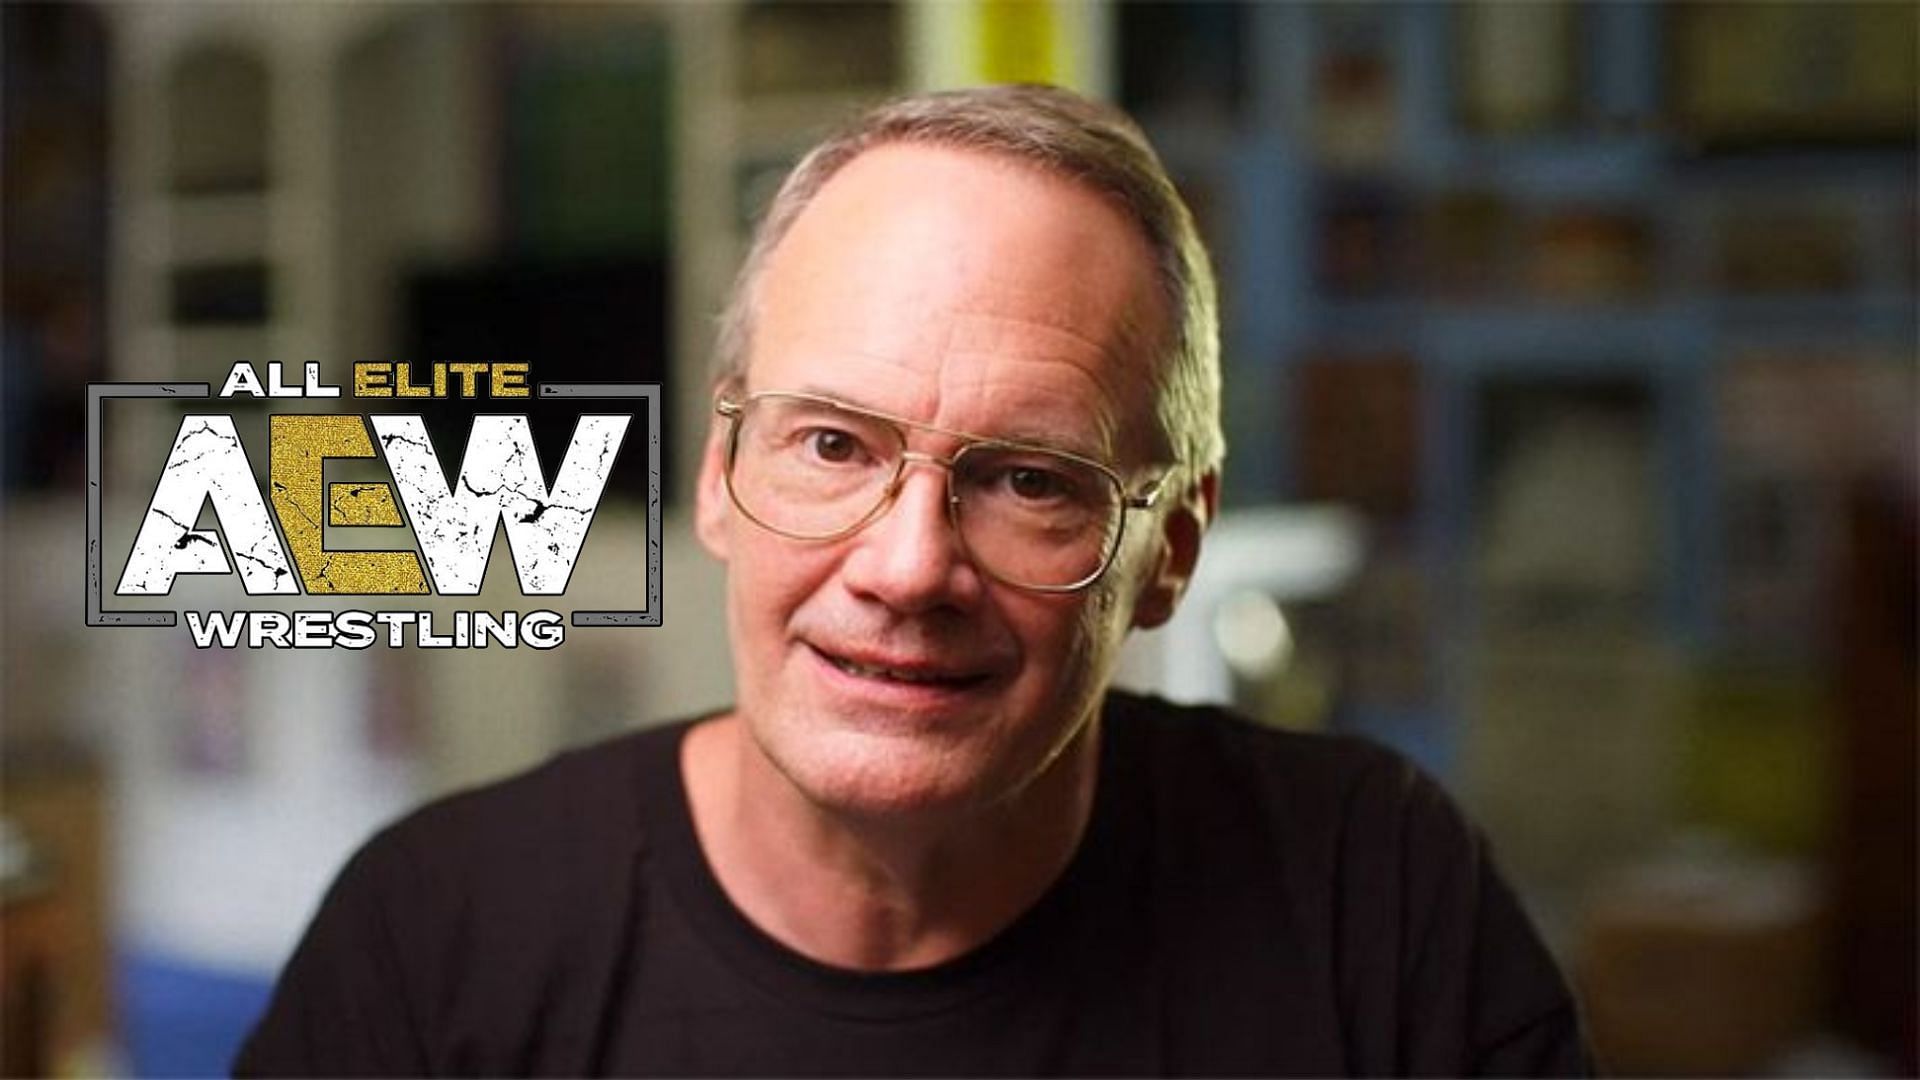 Jim Cornette reviewed a certain match from AEW Full Gear 2022 in his podcast.